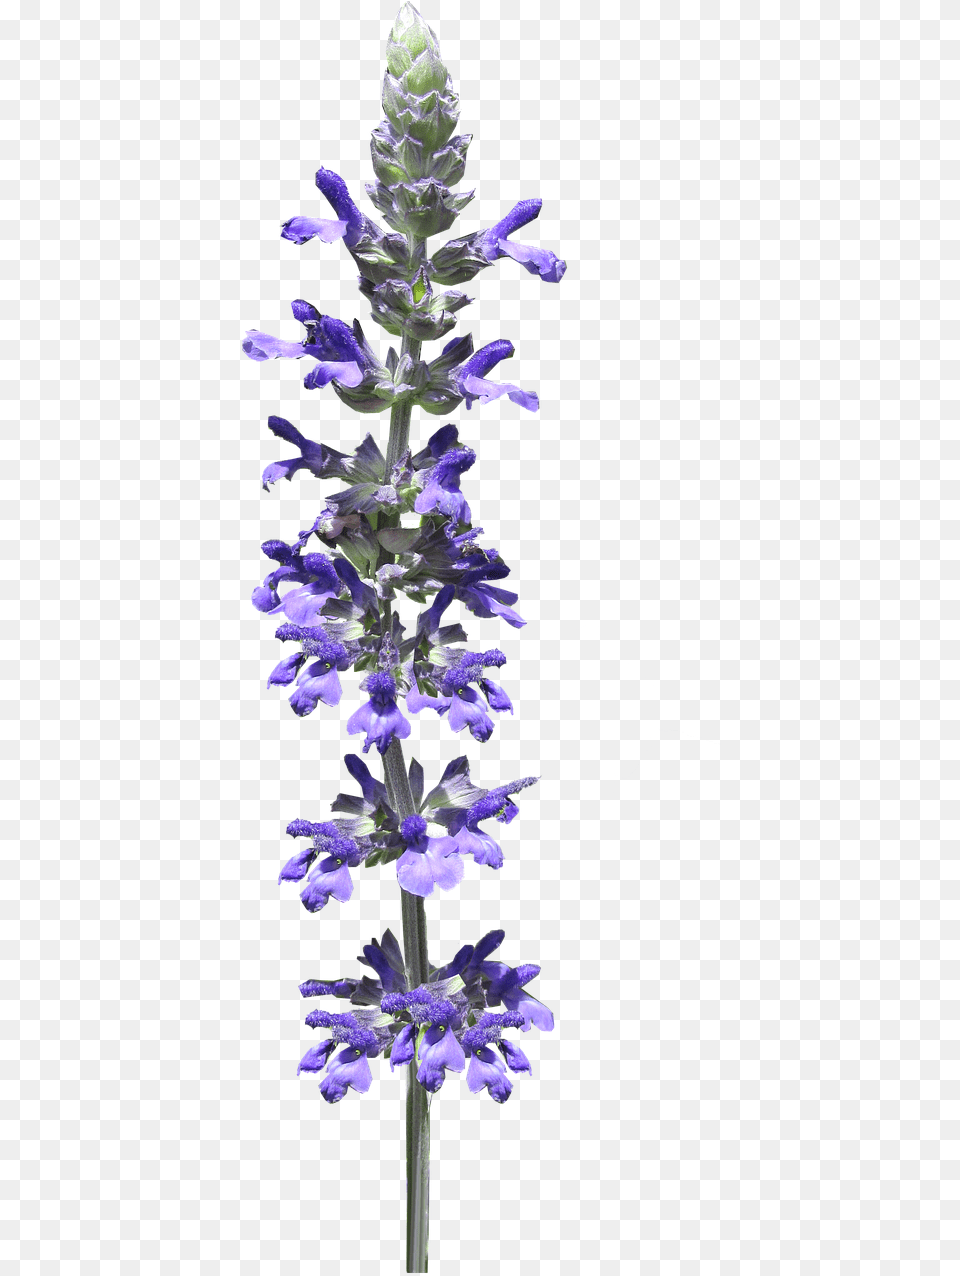 Flower Stem Blue Flower, Lupin, Plant, Acanthaceae, Iris Png